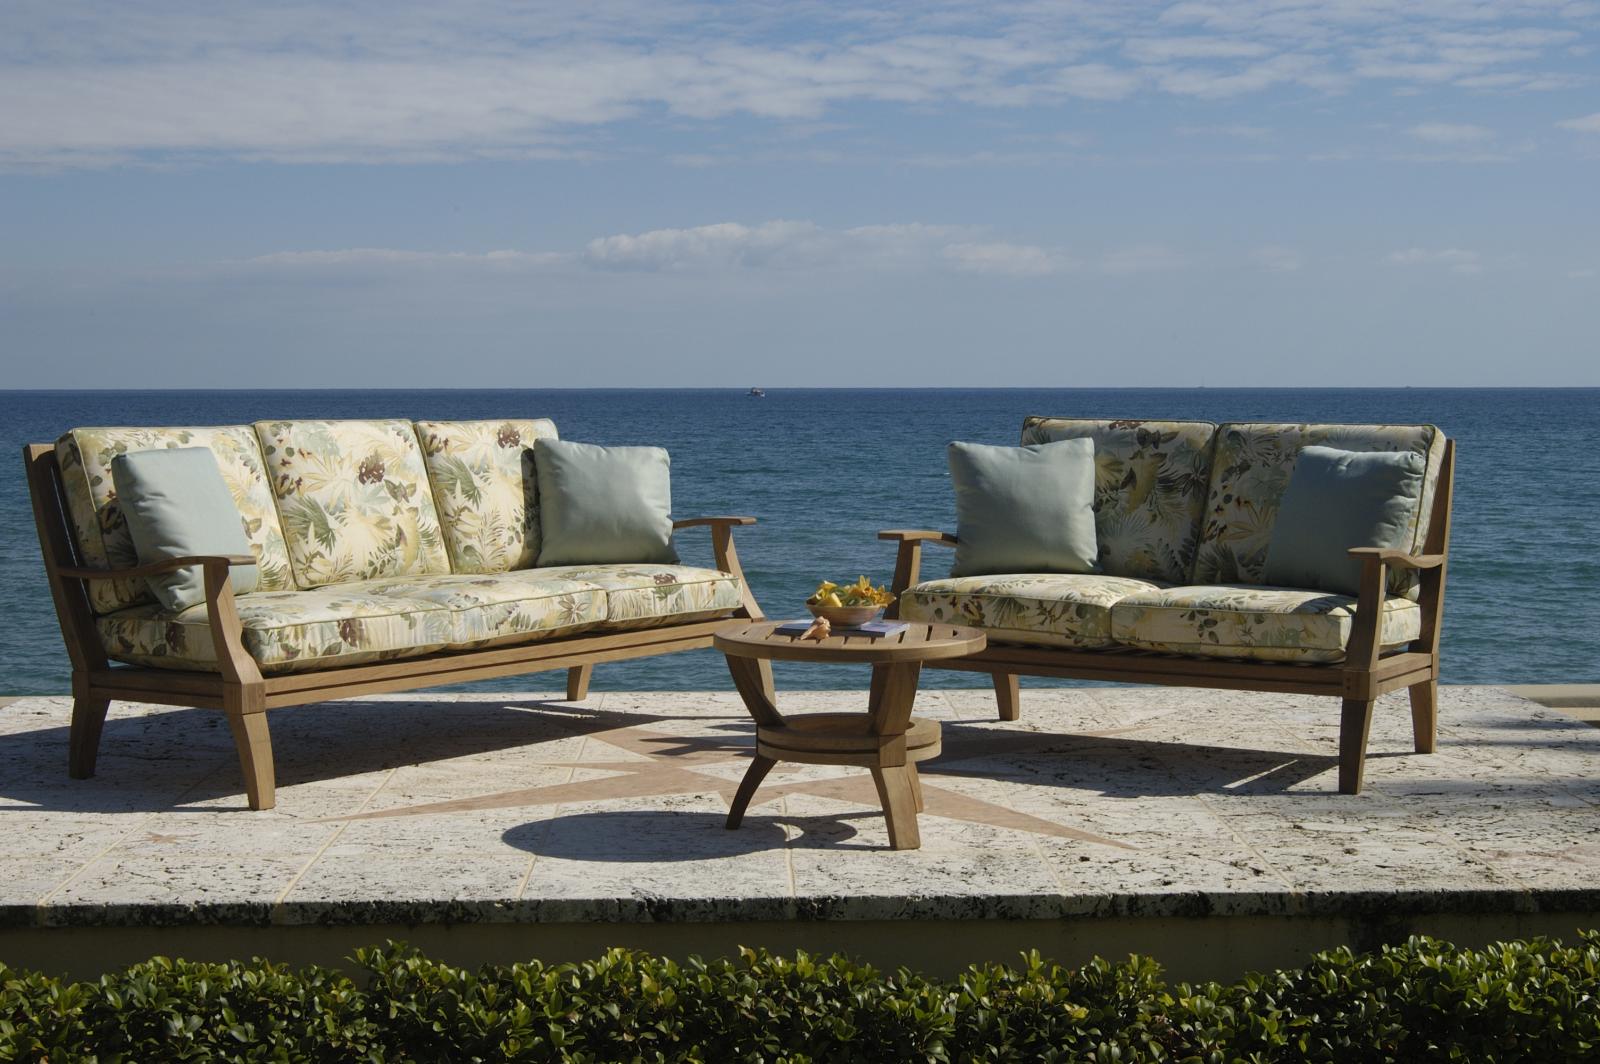 Outdoor furniture cleaners, Tampa Bay, FL Hillsborough, Pinellas, Pasco 